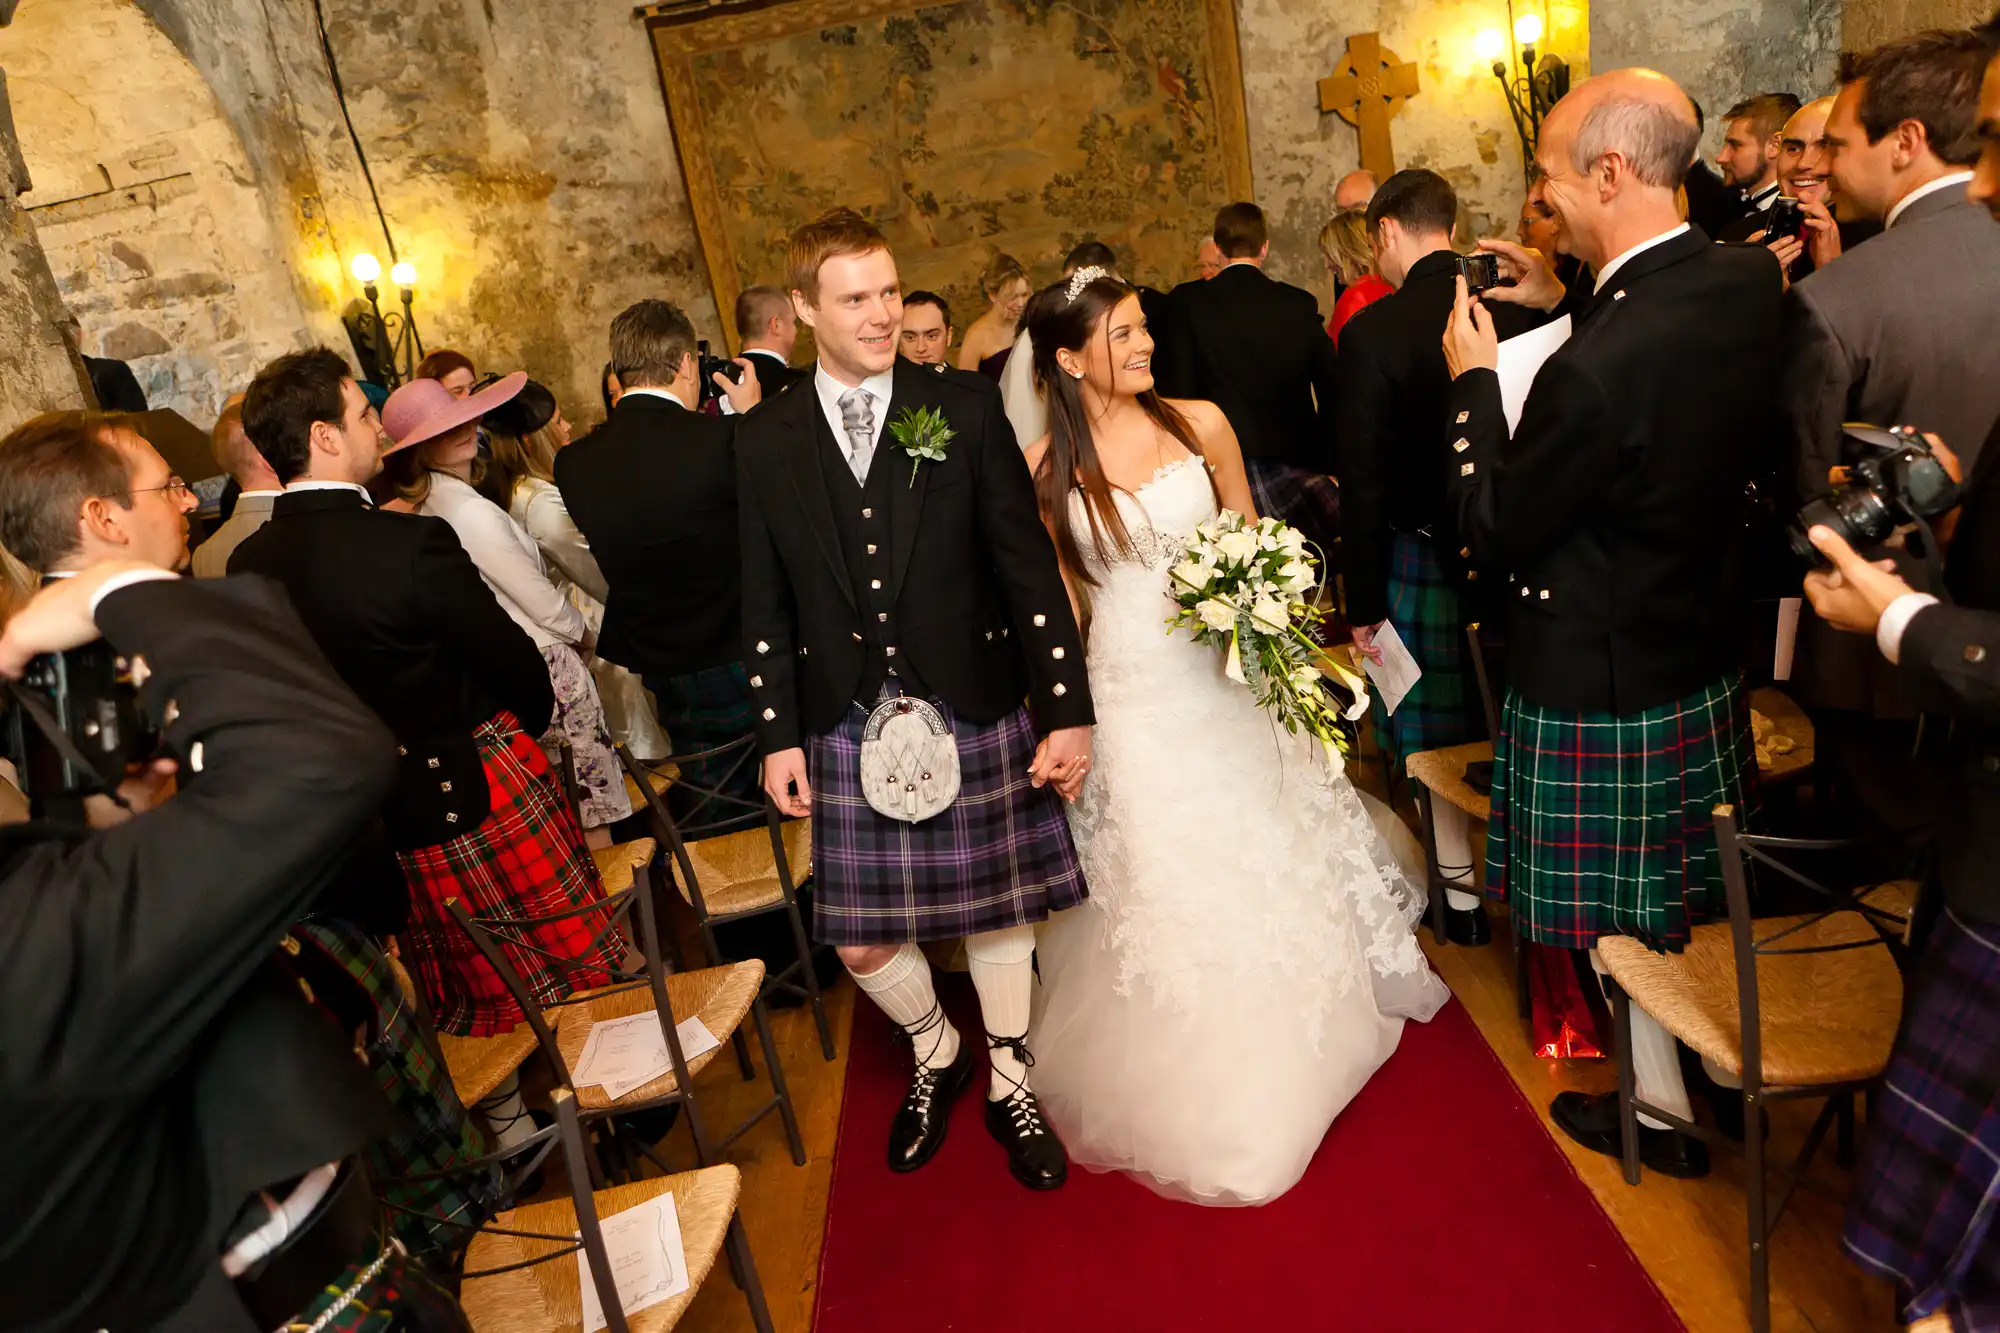 A bride and groom, dressed in a white gown and a kilt, smiling and walking down the aisle surrounded by guests in kilts taking photos.